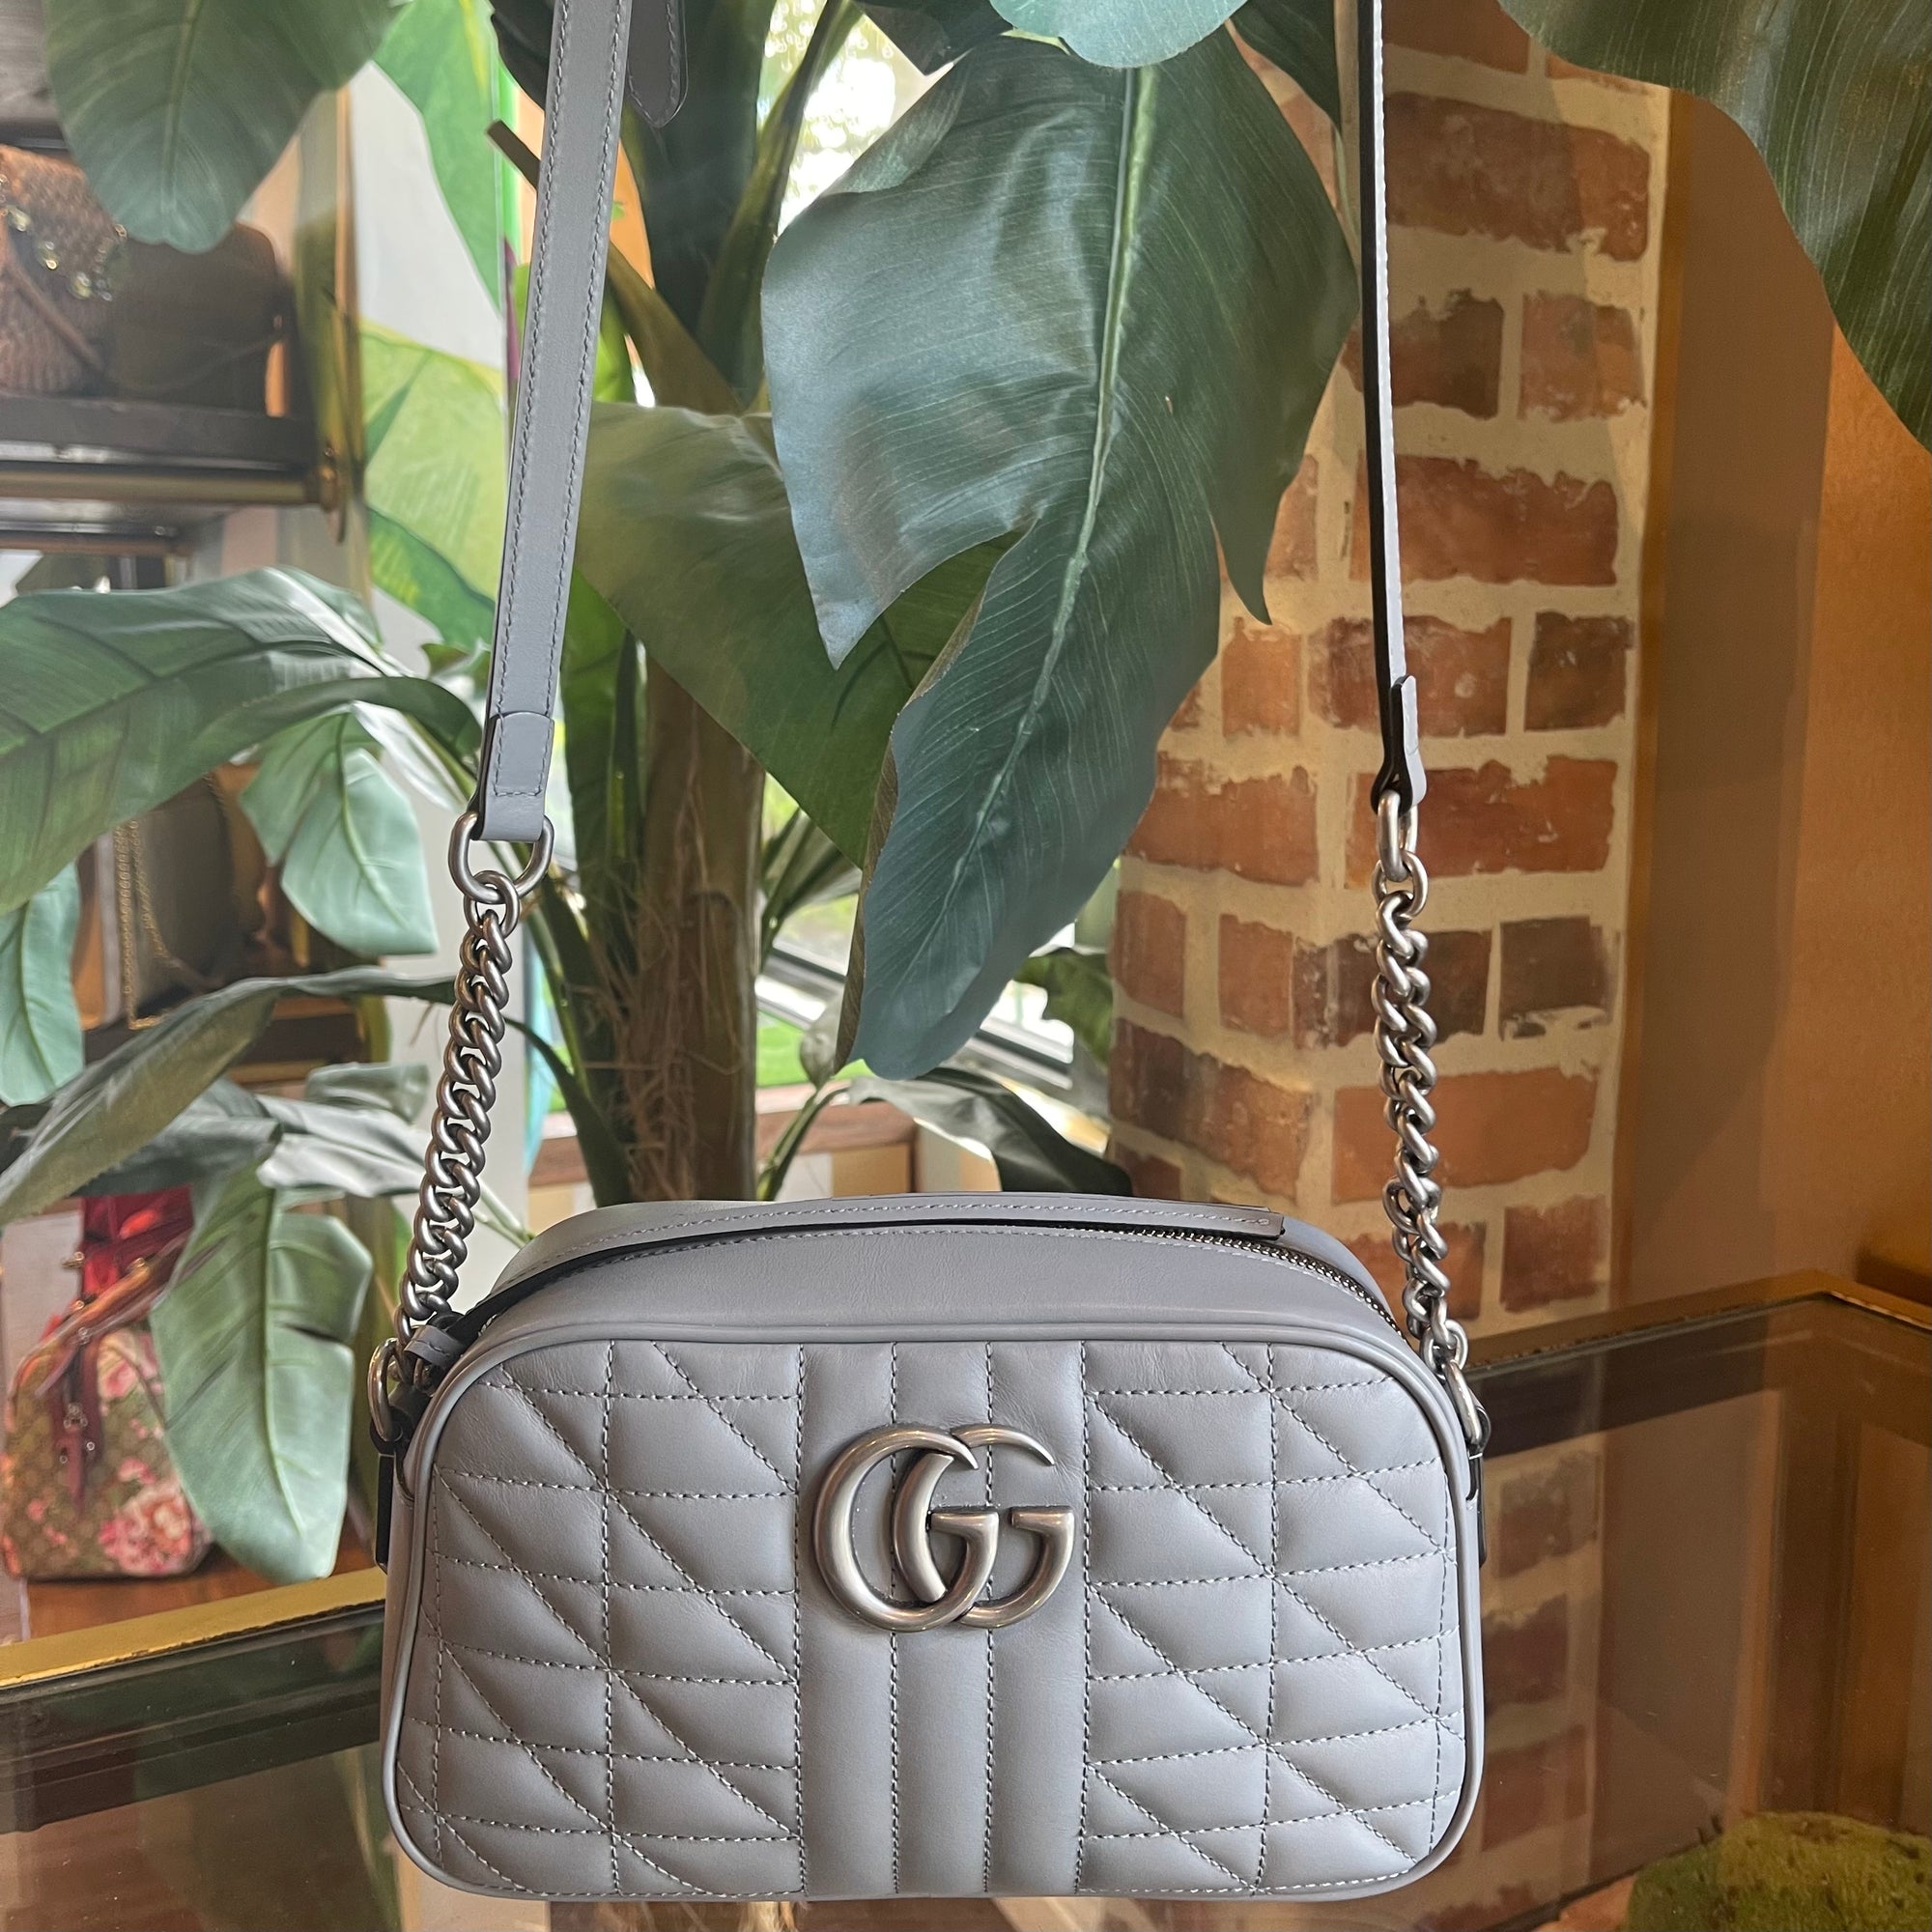 Authentic Gucci Bags, Shoes and Accessories - The Purse Ladies